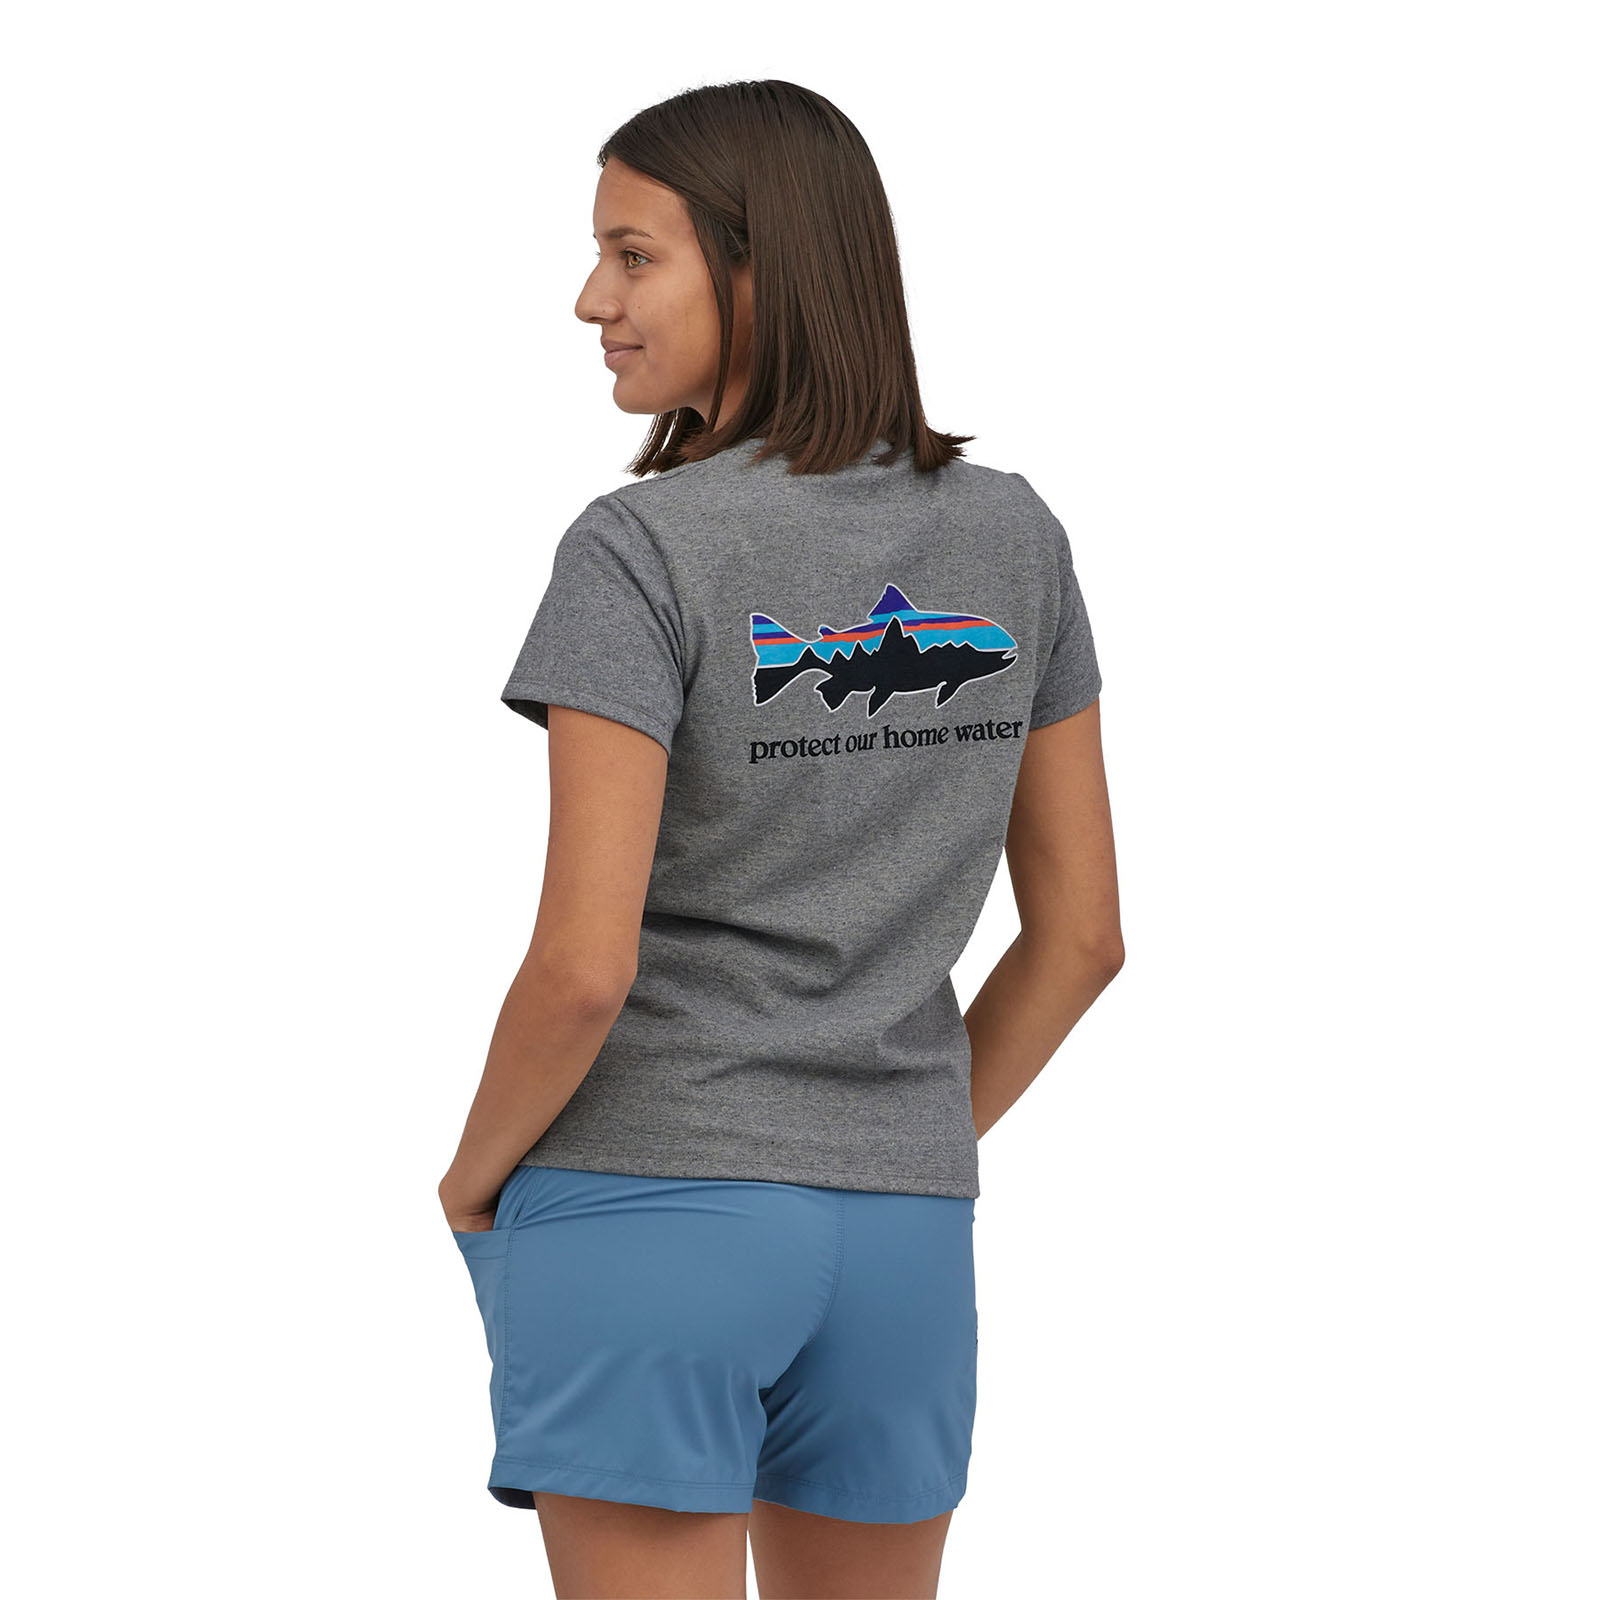 Patagonia Women's Home Water Trout Pocket Responsibili-Tee - AvidMax